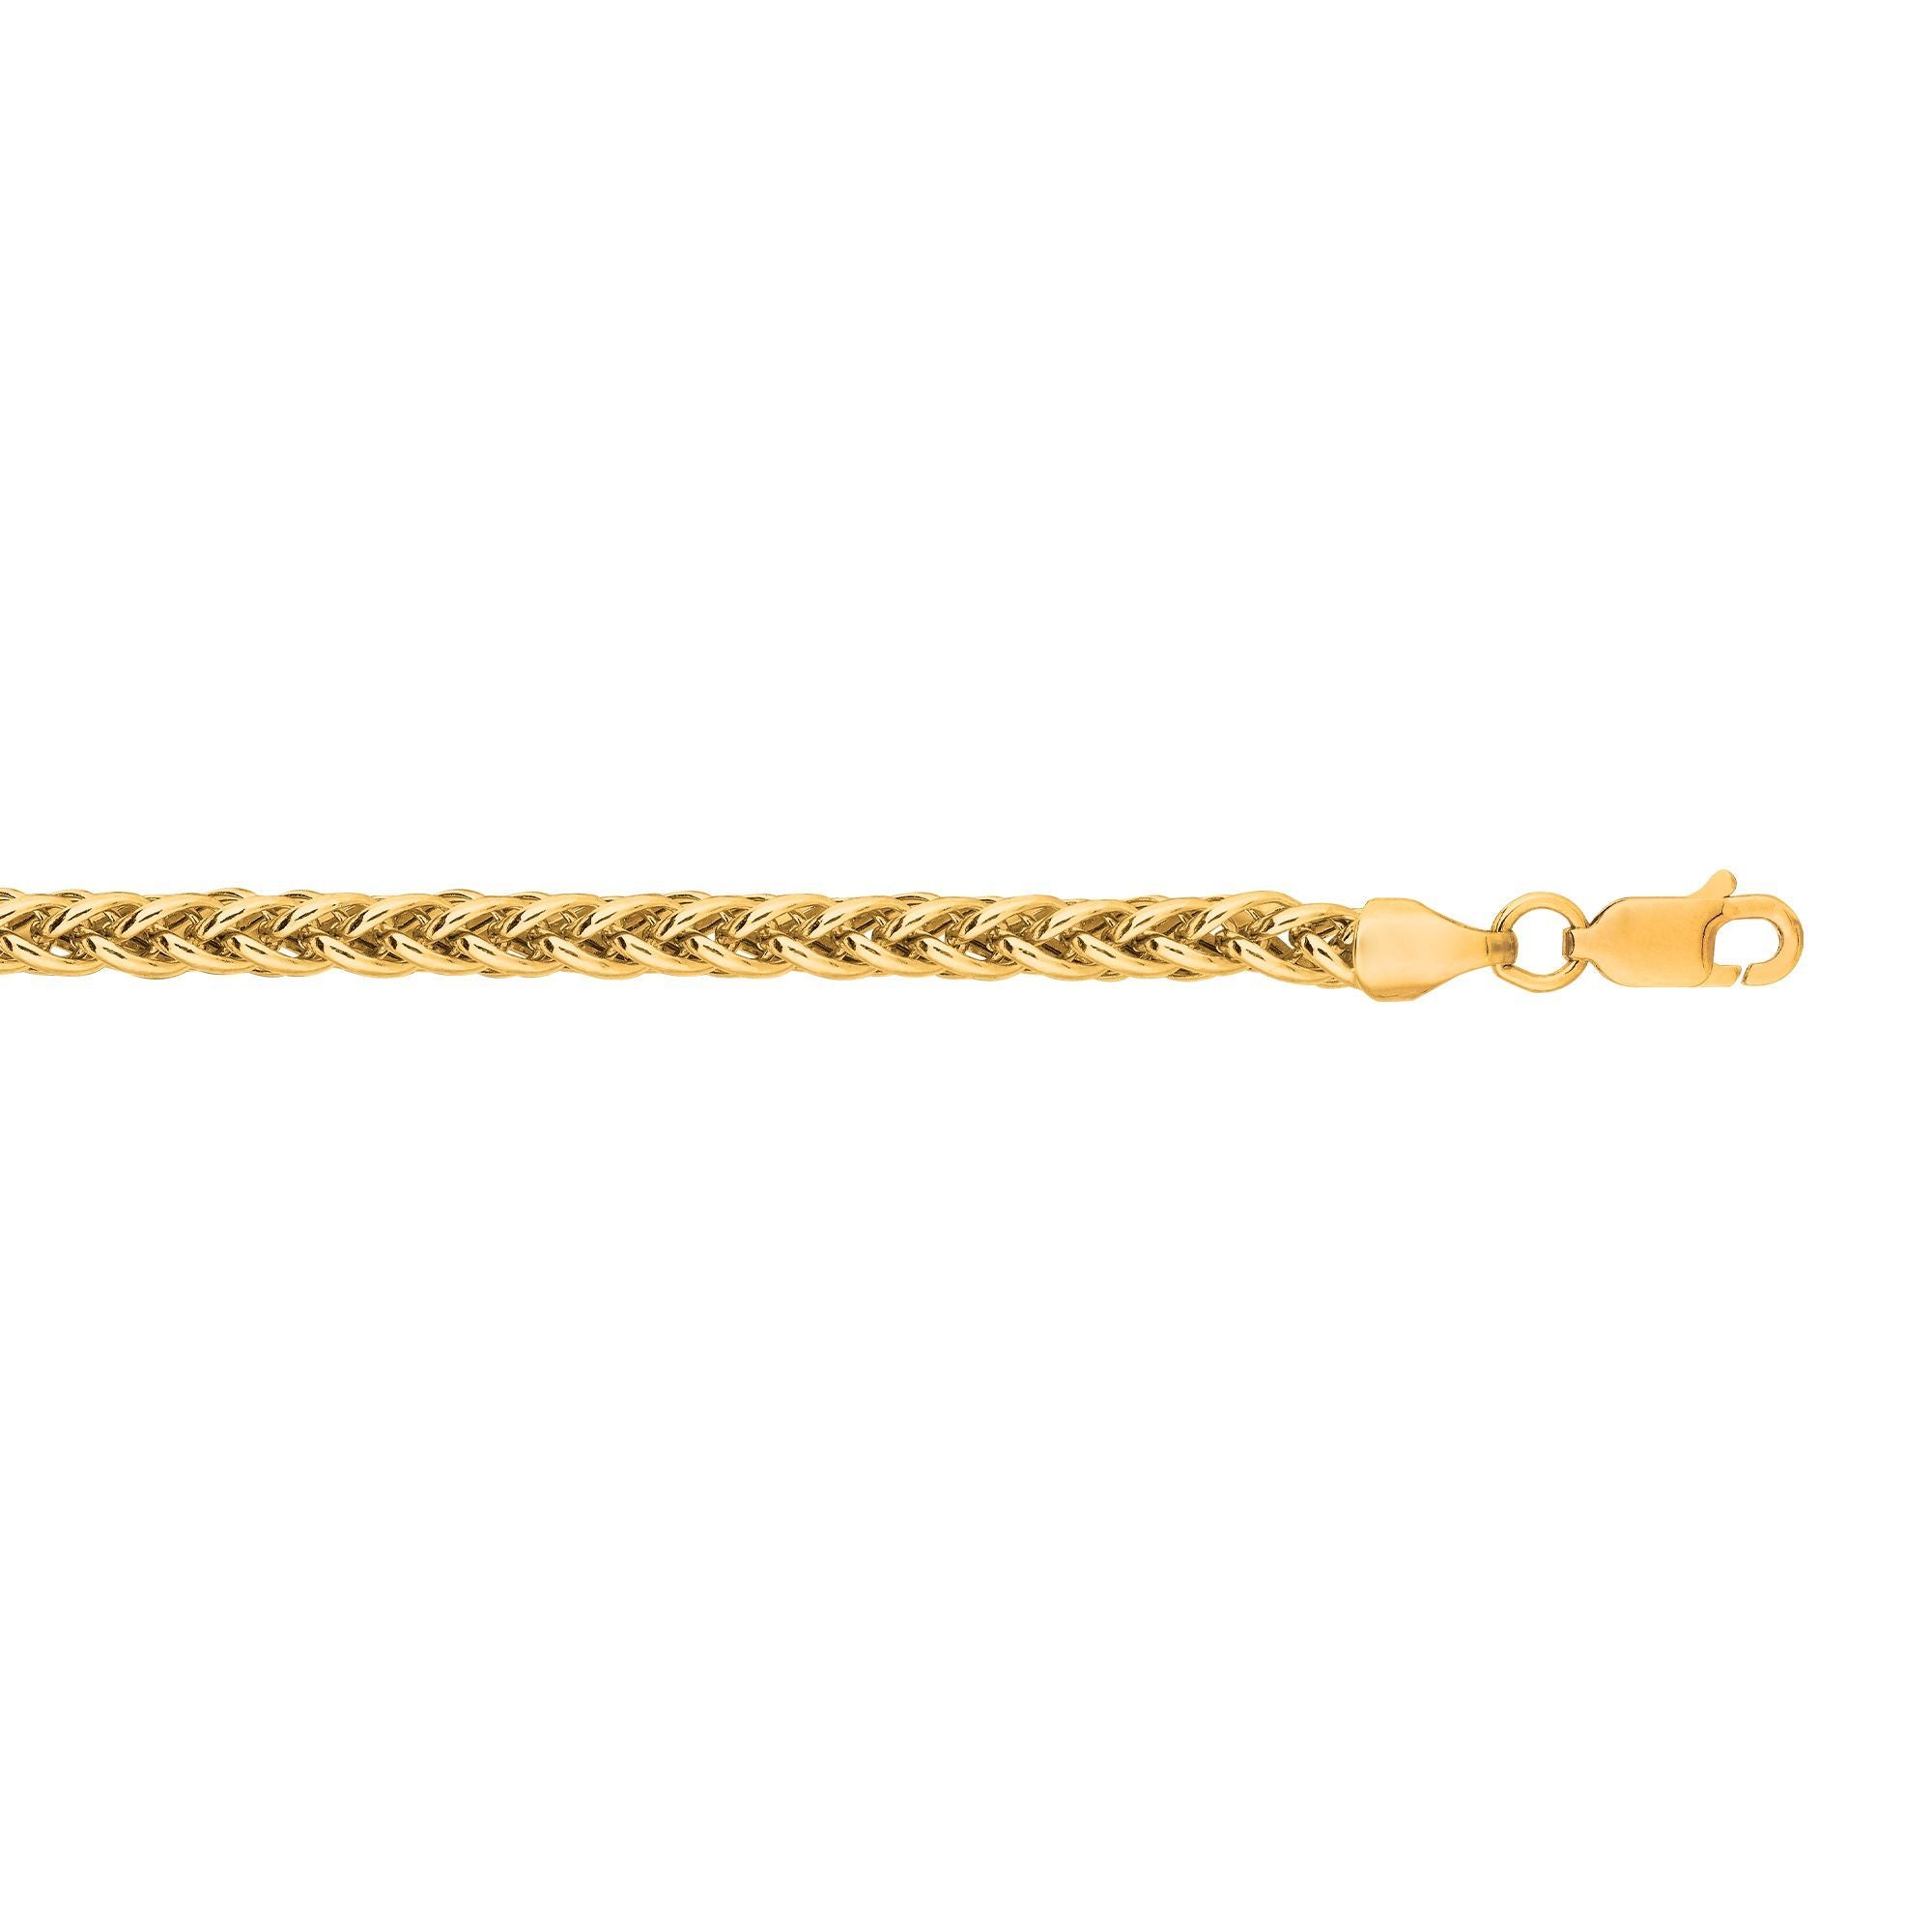 Shiny Lite Weight Round Wheat Chain with Lobster Clasp - wingroupjewelry